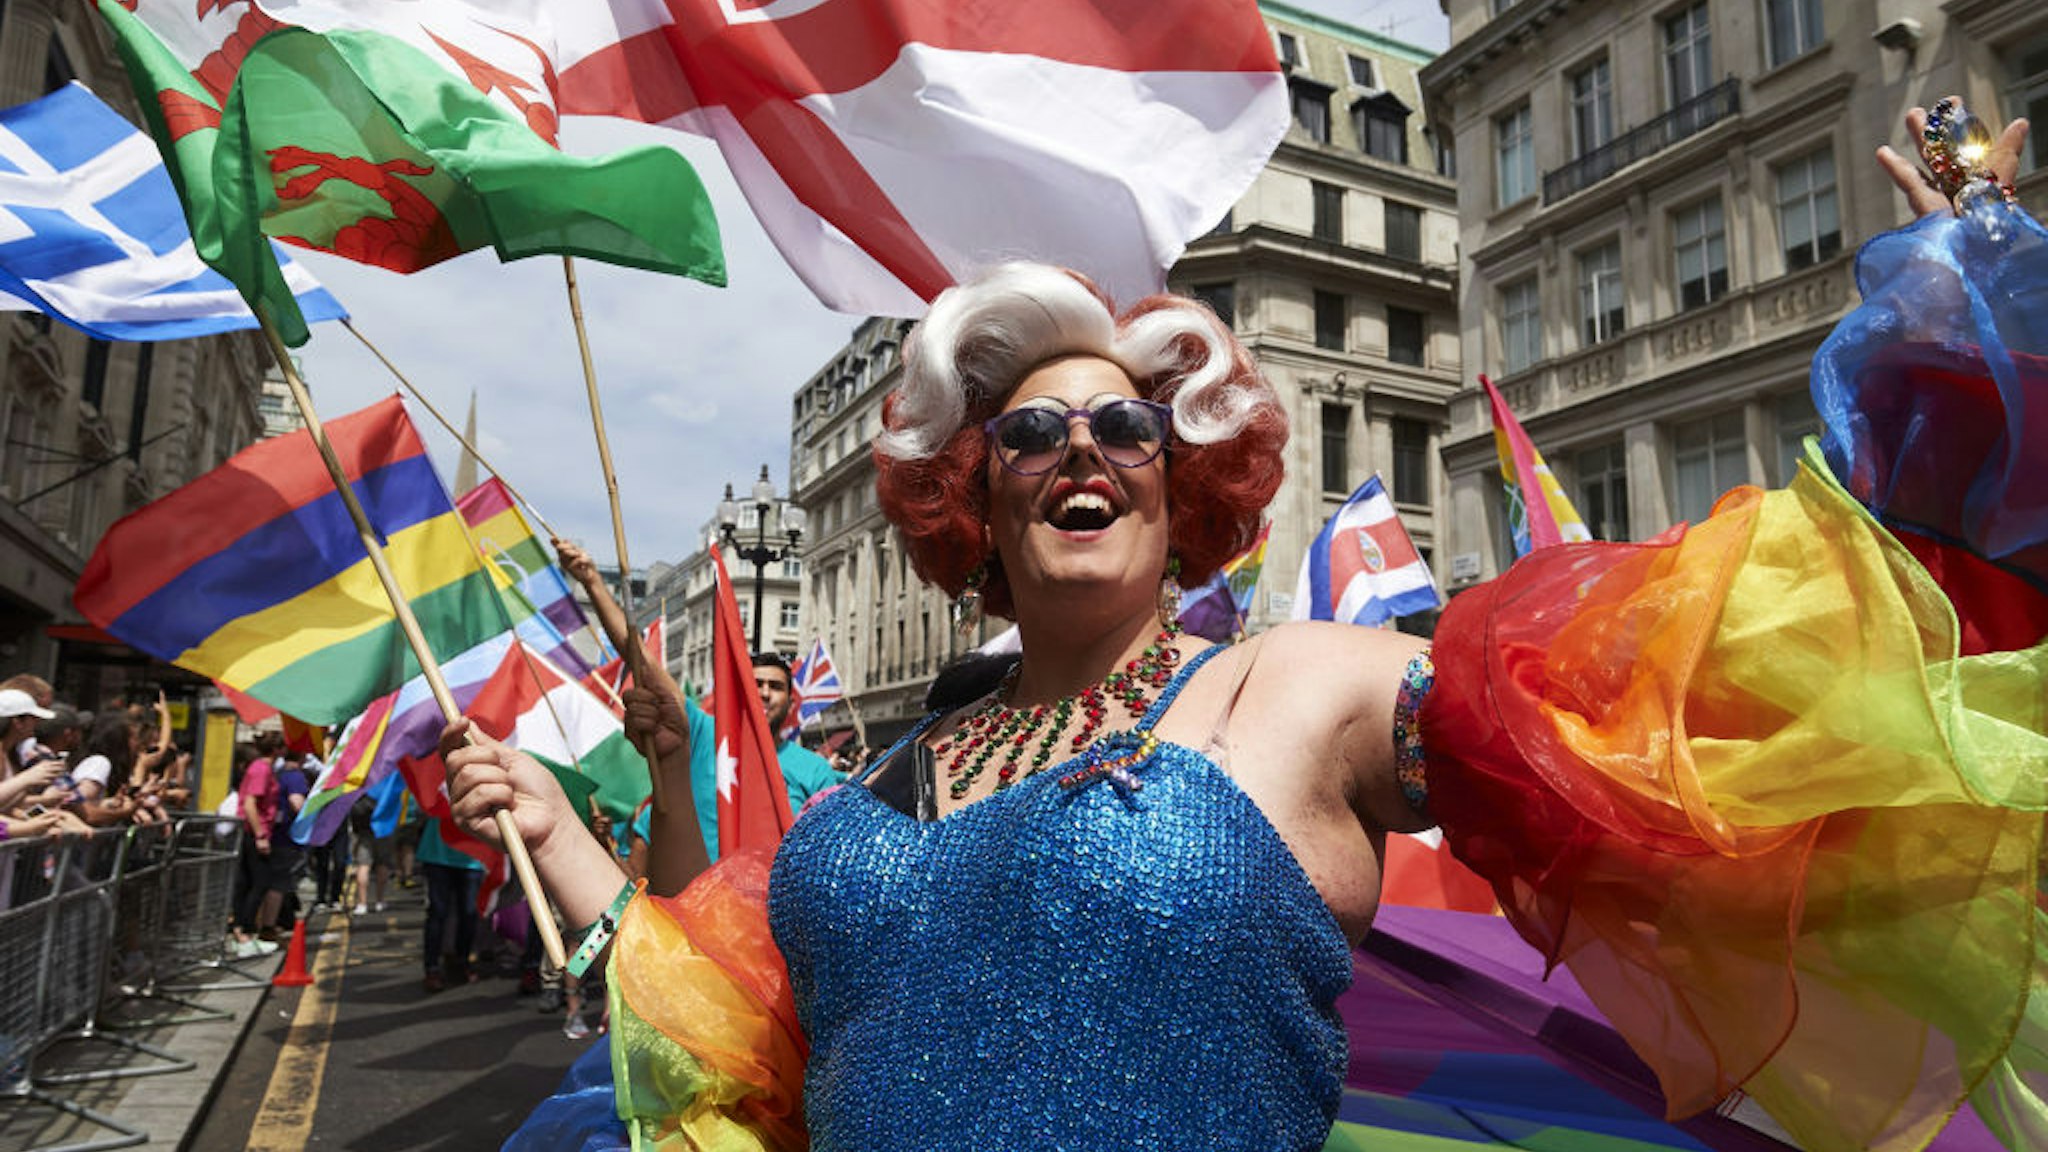 Members of the Lesbian, Gay, Bisexual and Transgender (LGBT) community take part in the annual Pride Parade in London on July 8, 2017. / AFP PHOTO / NIKLAS HALLE'N (Photo credit should read NIKLAS HALLE'N/AFP via Getty Images)